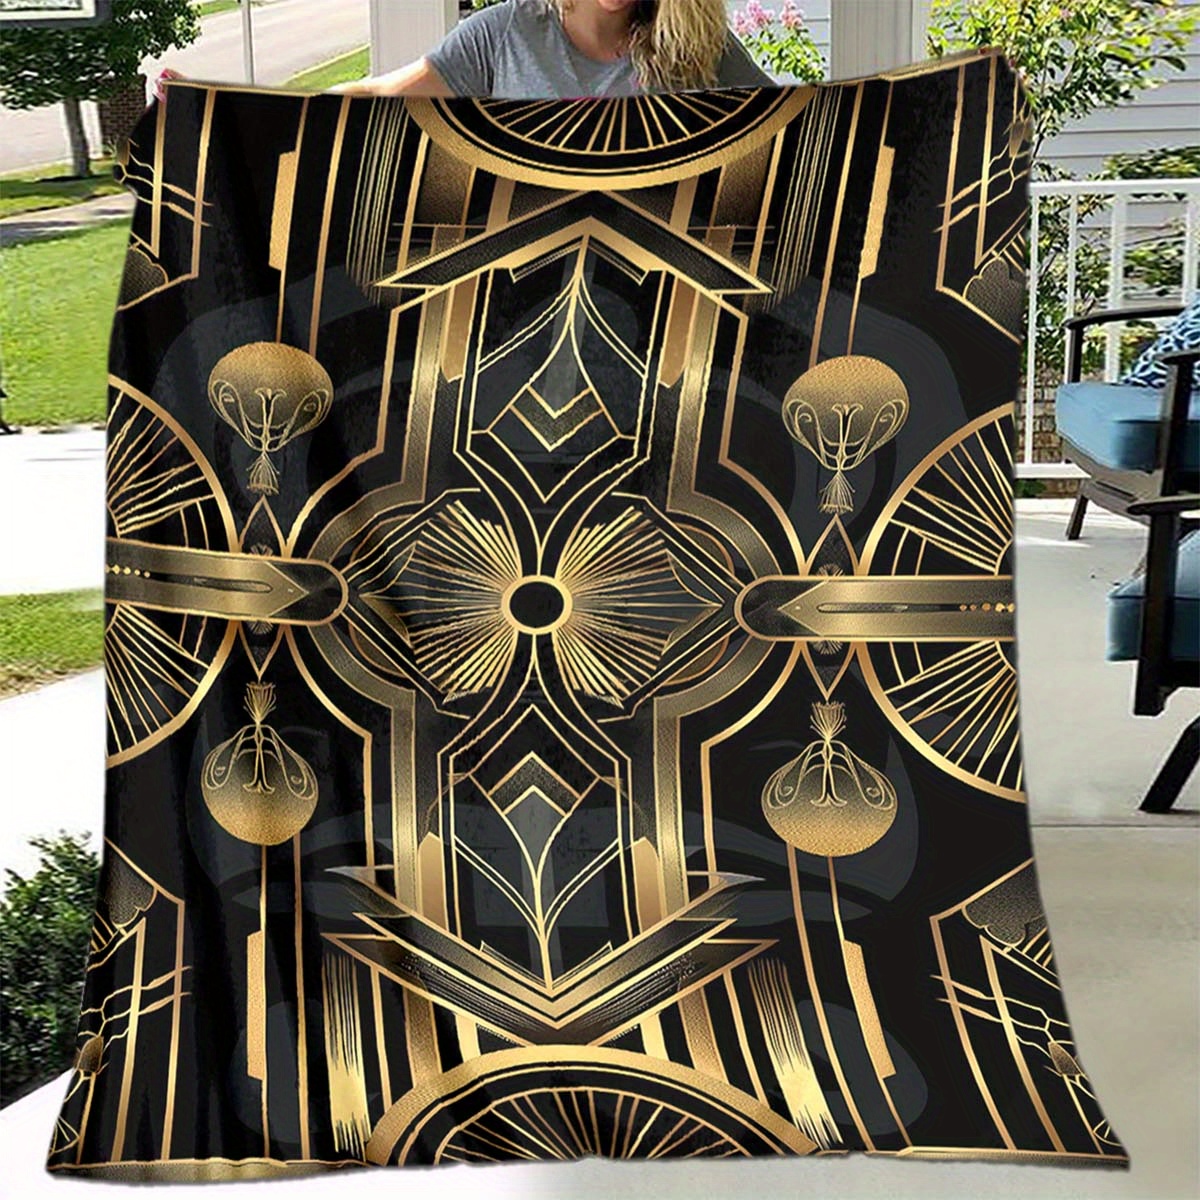 

Luxury Gold And Black Flannel Throw Blanket - Soft Polyester Fabric, 100% Polyester Composition, Large Size Couch Chair Cover For Living Room Bedroom Bed Sofa Picnic Decor Napping Car Use